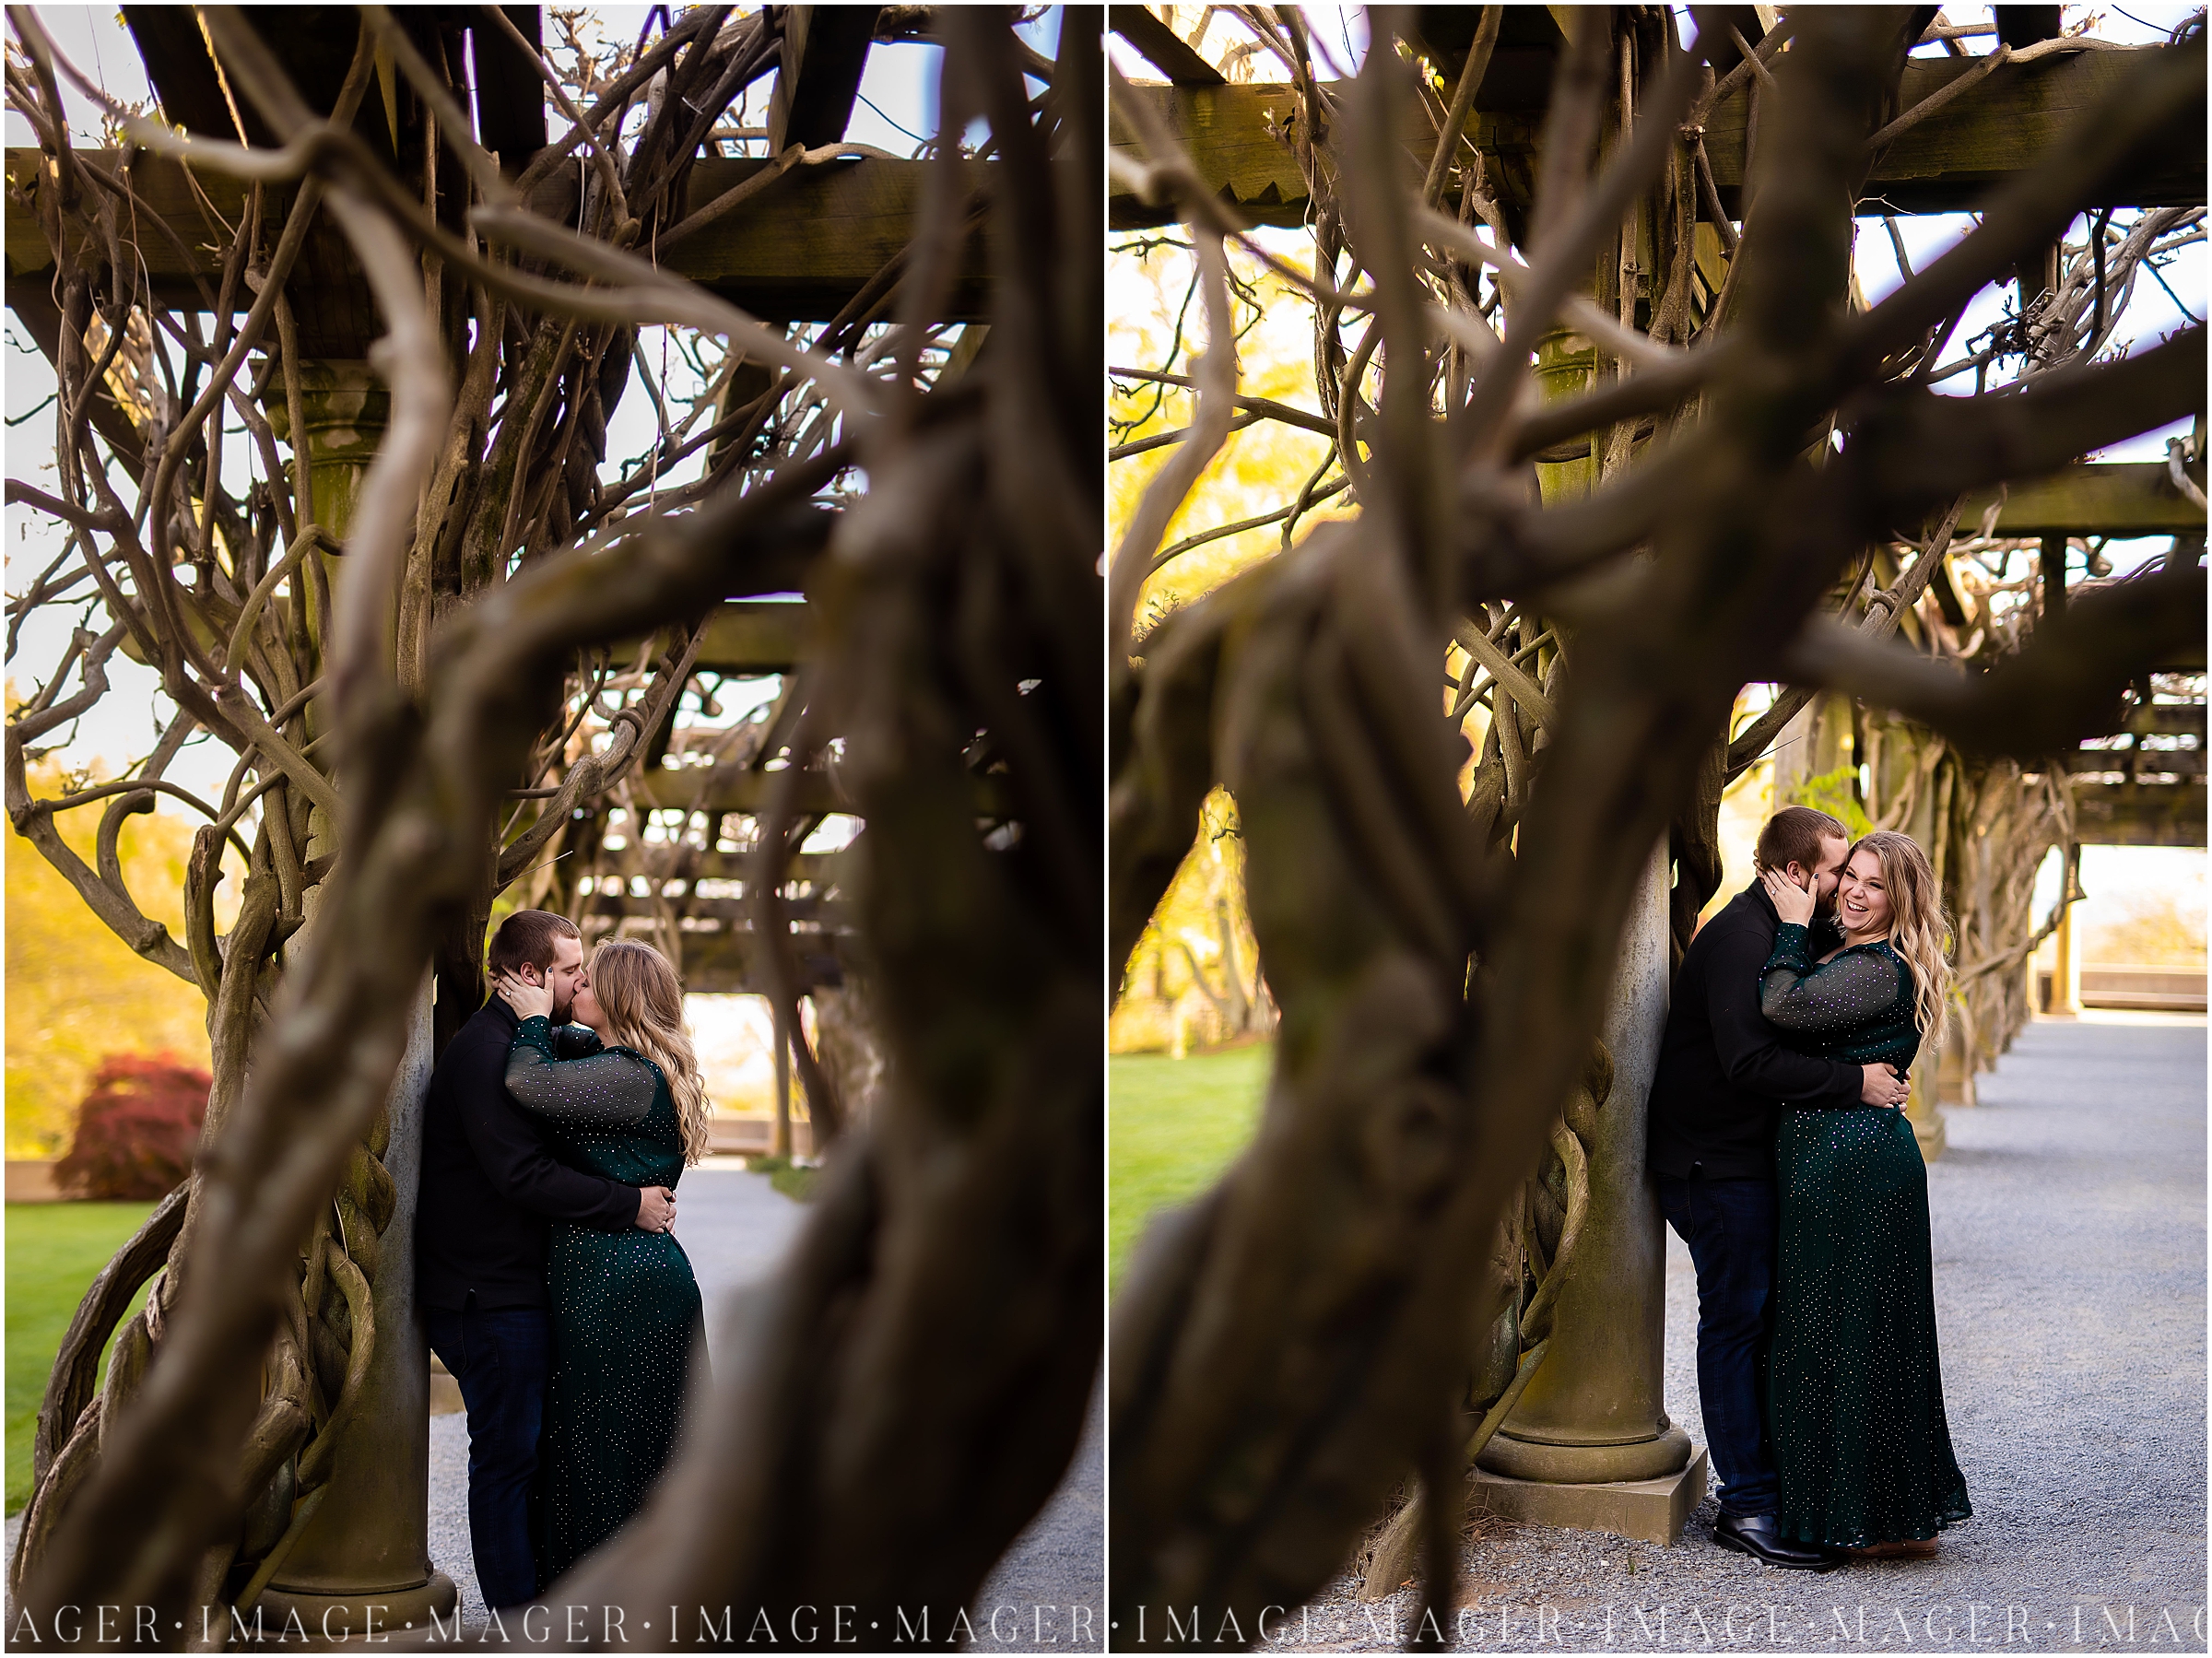 tree vines, Biltmore Winery, romantic edgy engagement session